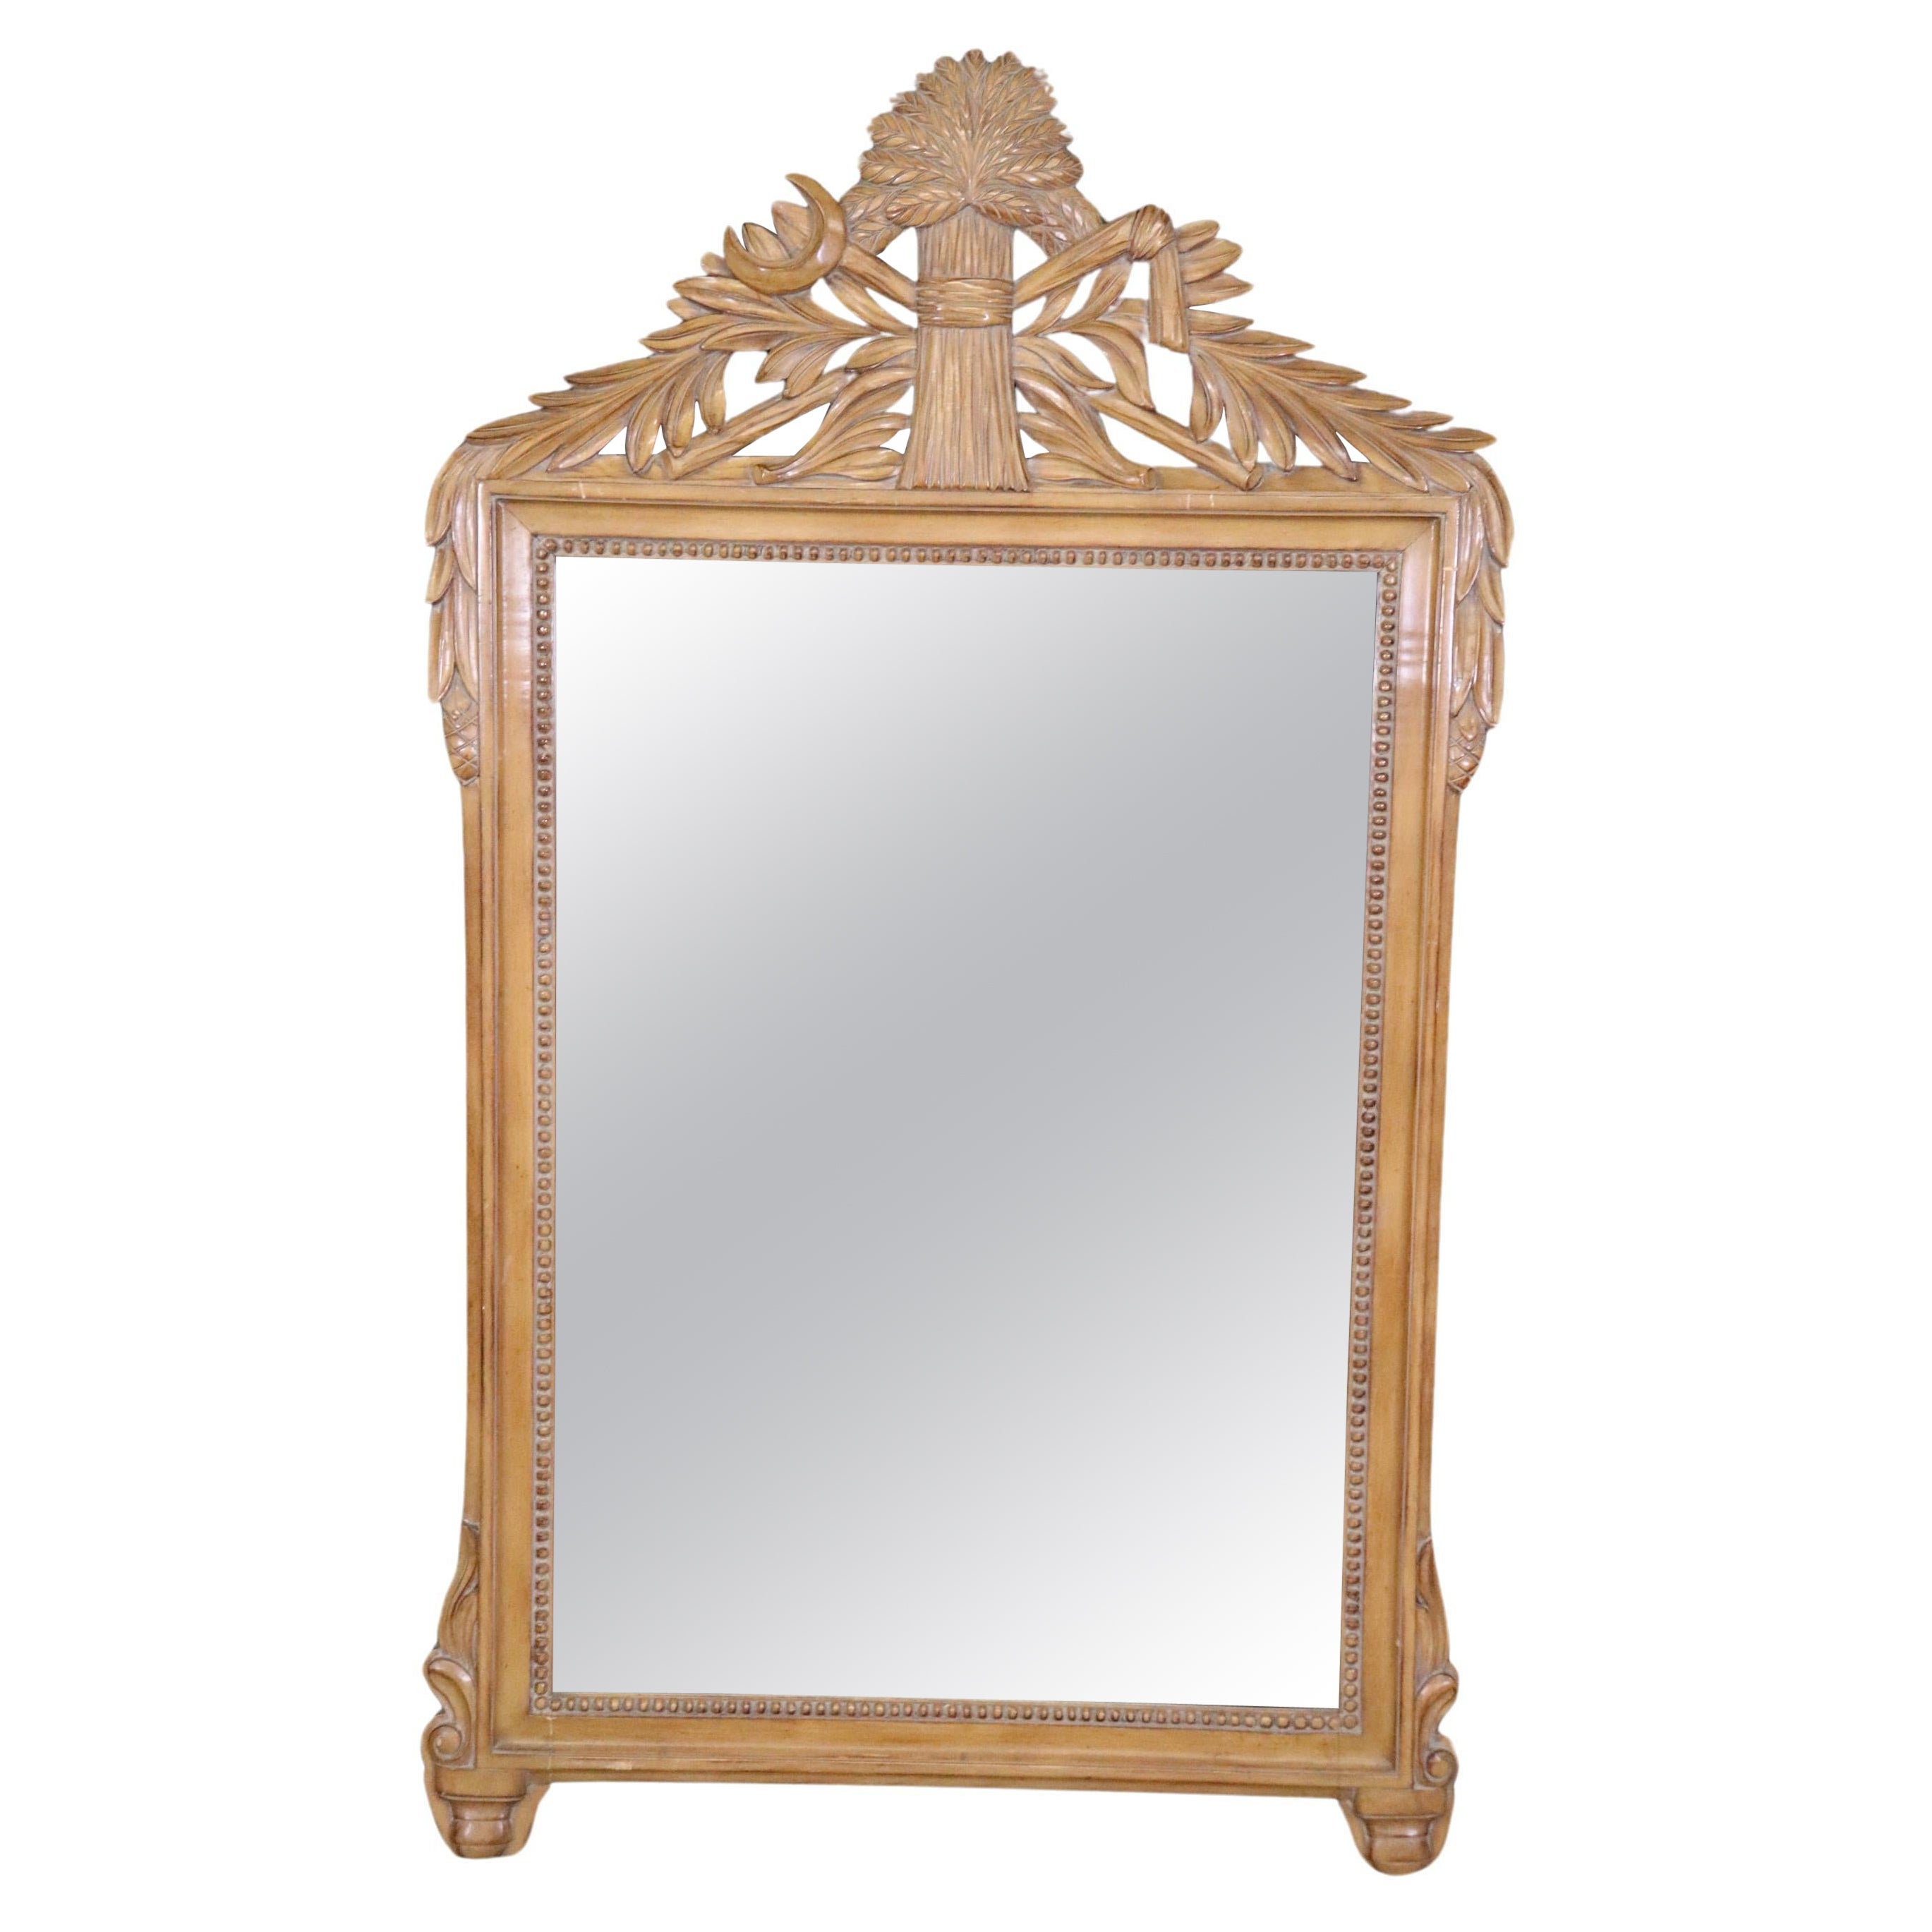 Vintage French Louis XV Style Carved Wall Hanging Mirror